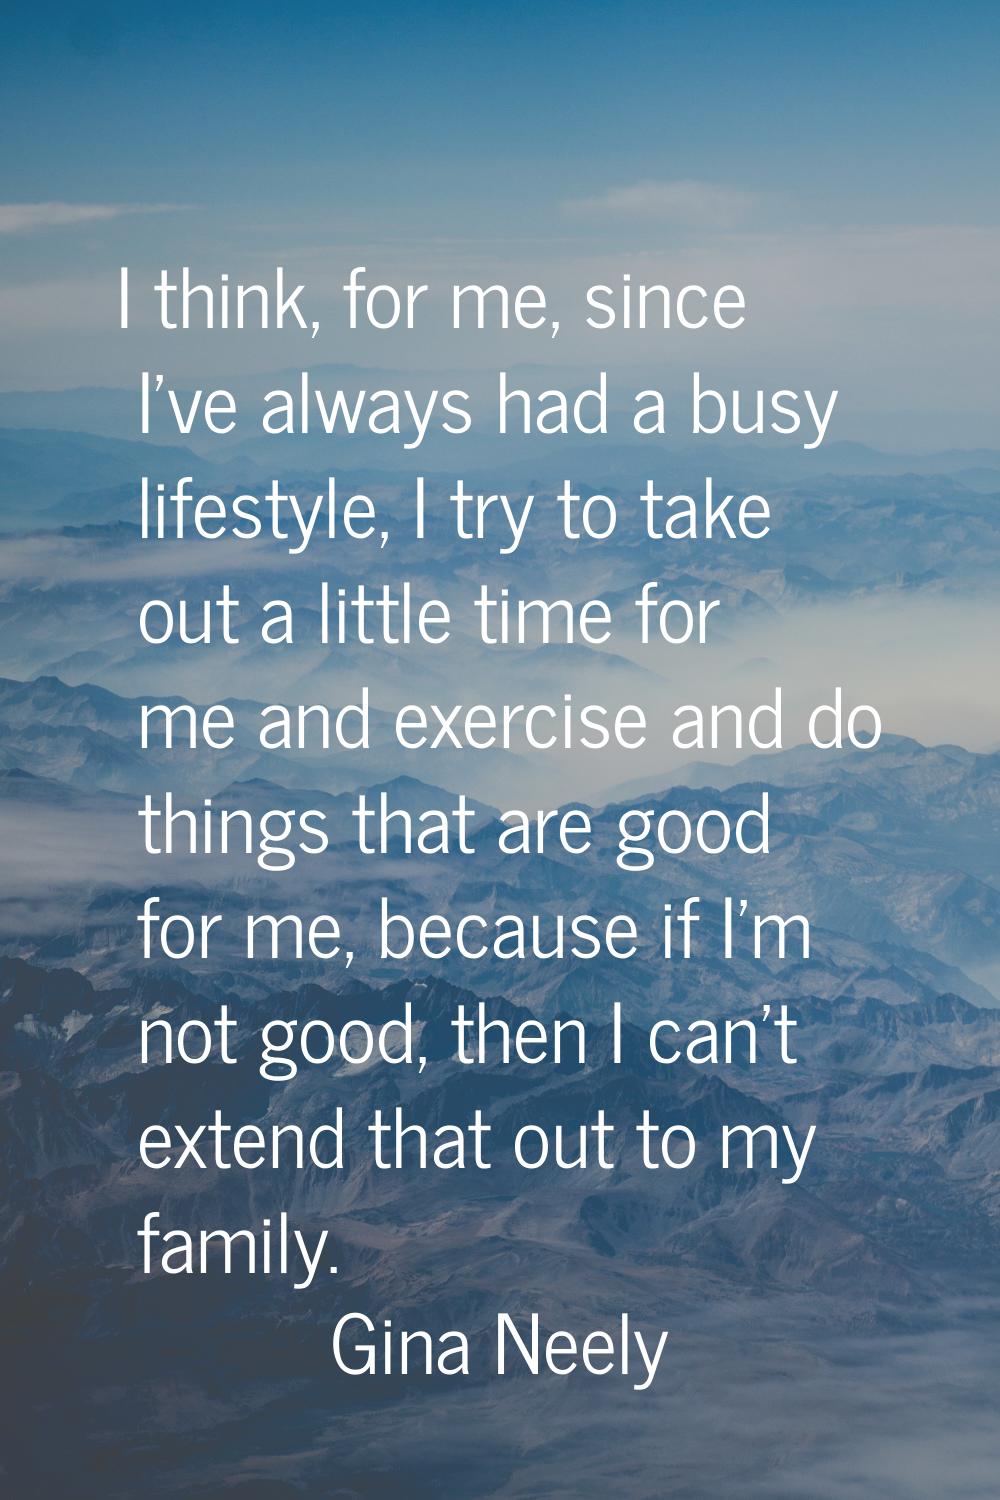 I think, for me, since I've always had a busy lifestyle, I try to take out a little time for me and